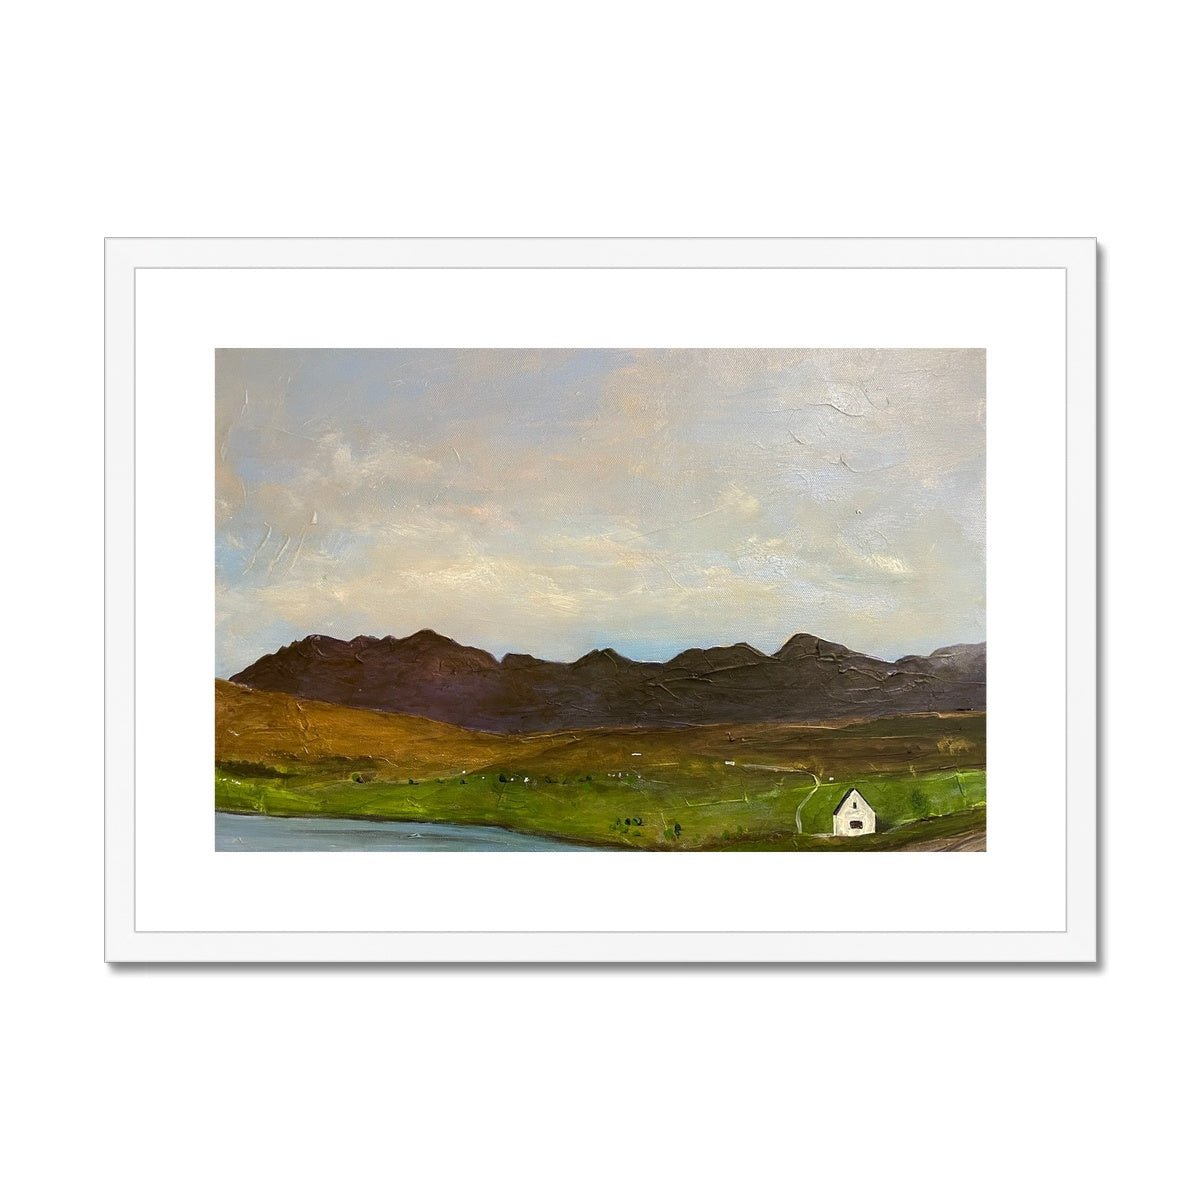 The Road To Carbost Skye Painting | Framed & Mounted Prints From Scotland-Framed & Mounted Prints-Skye Art Gallery-A2 Landscape-White Frame-Paintings, Prints, Homeware, Art Gifts From Scotland By Scottish Artist Kevin Hunter